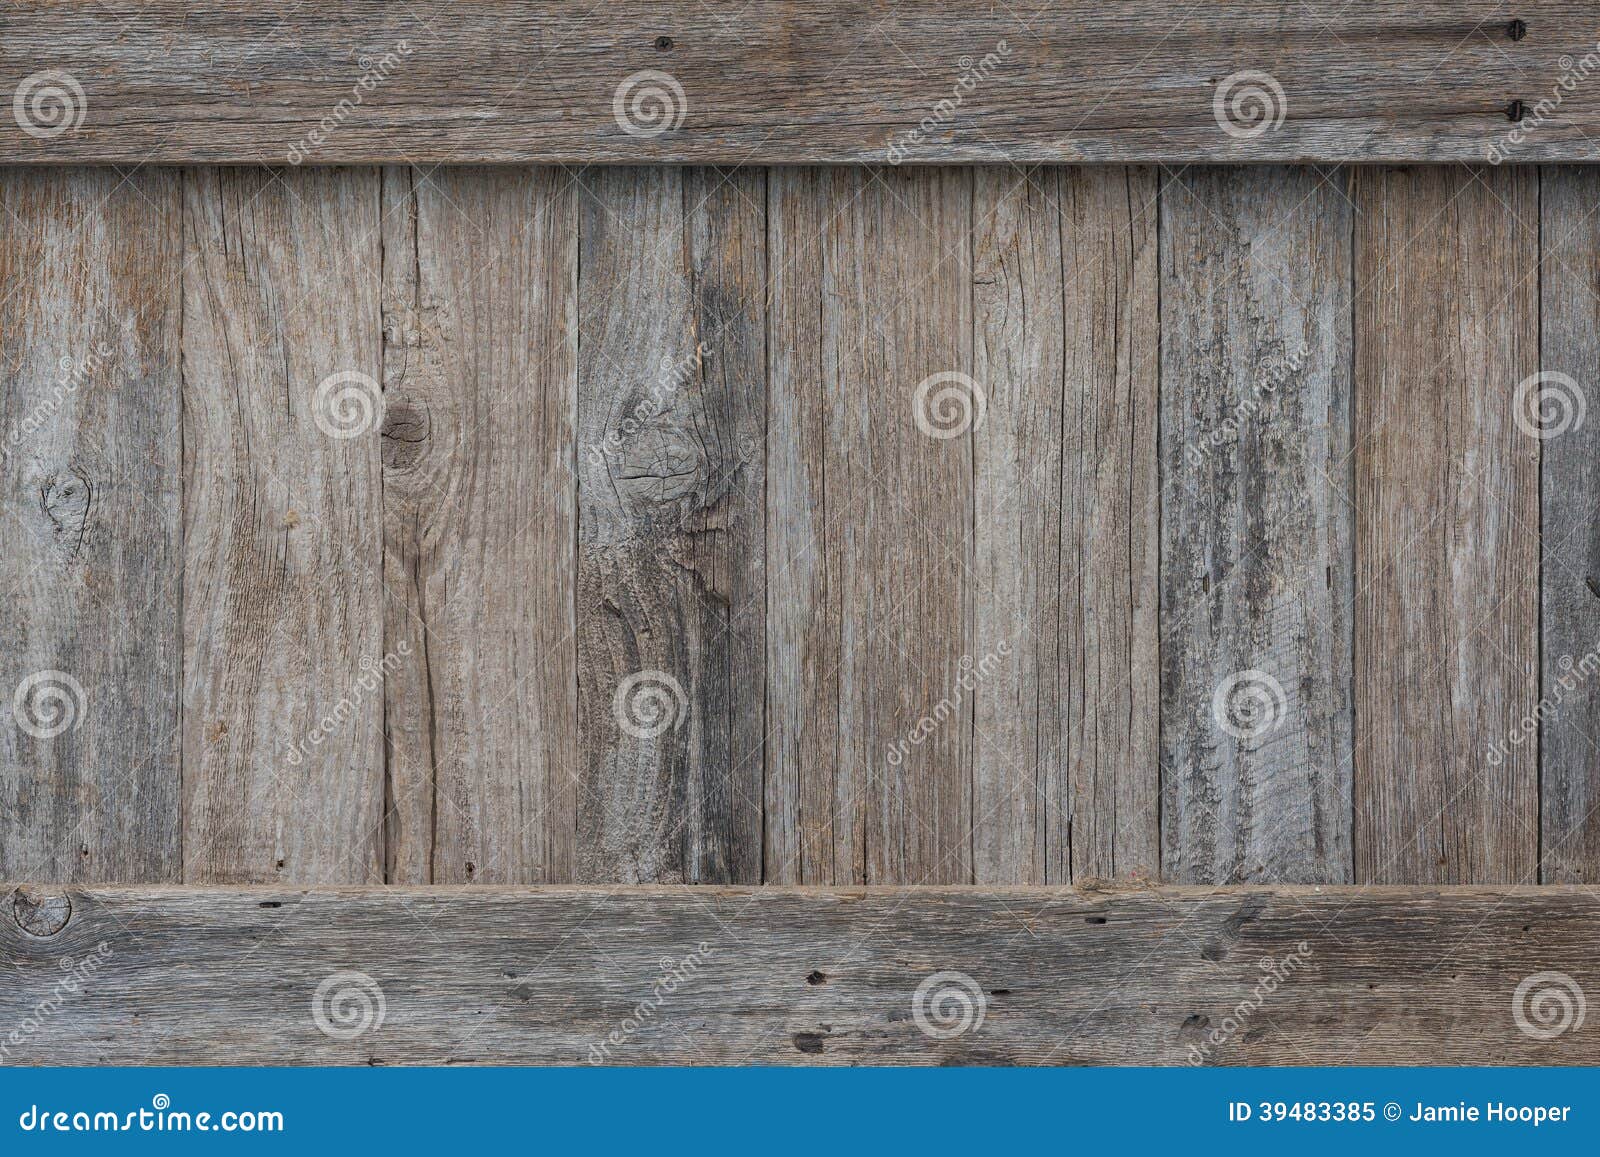 Weathered boards on the side of an old wooden crate or box with border 